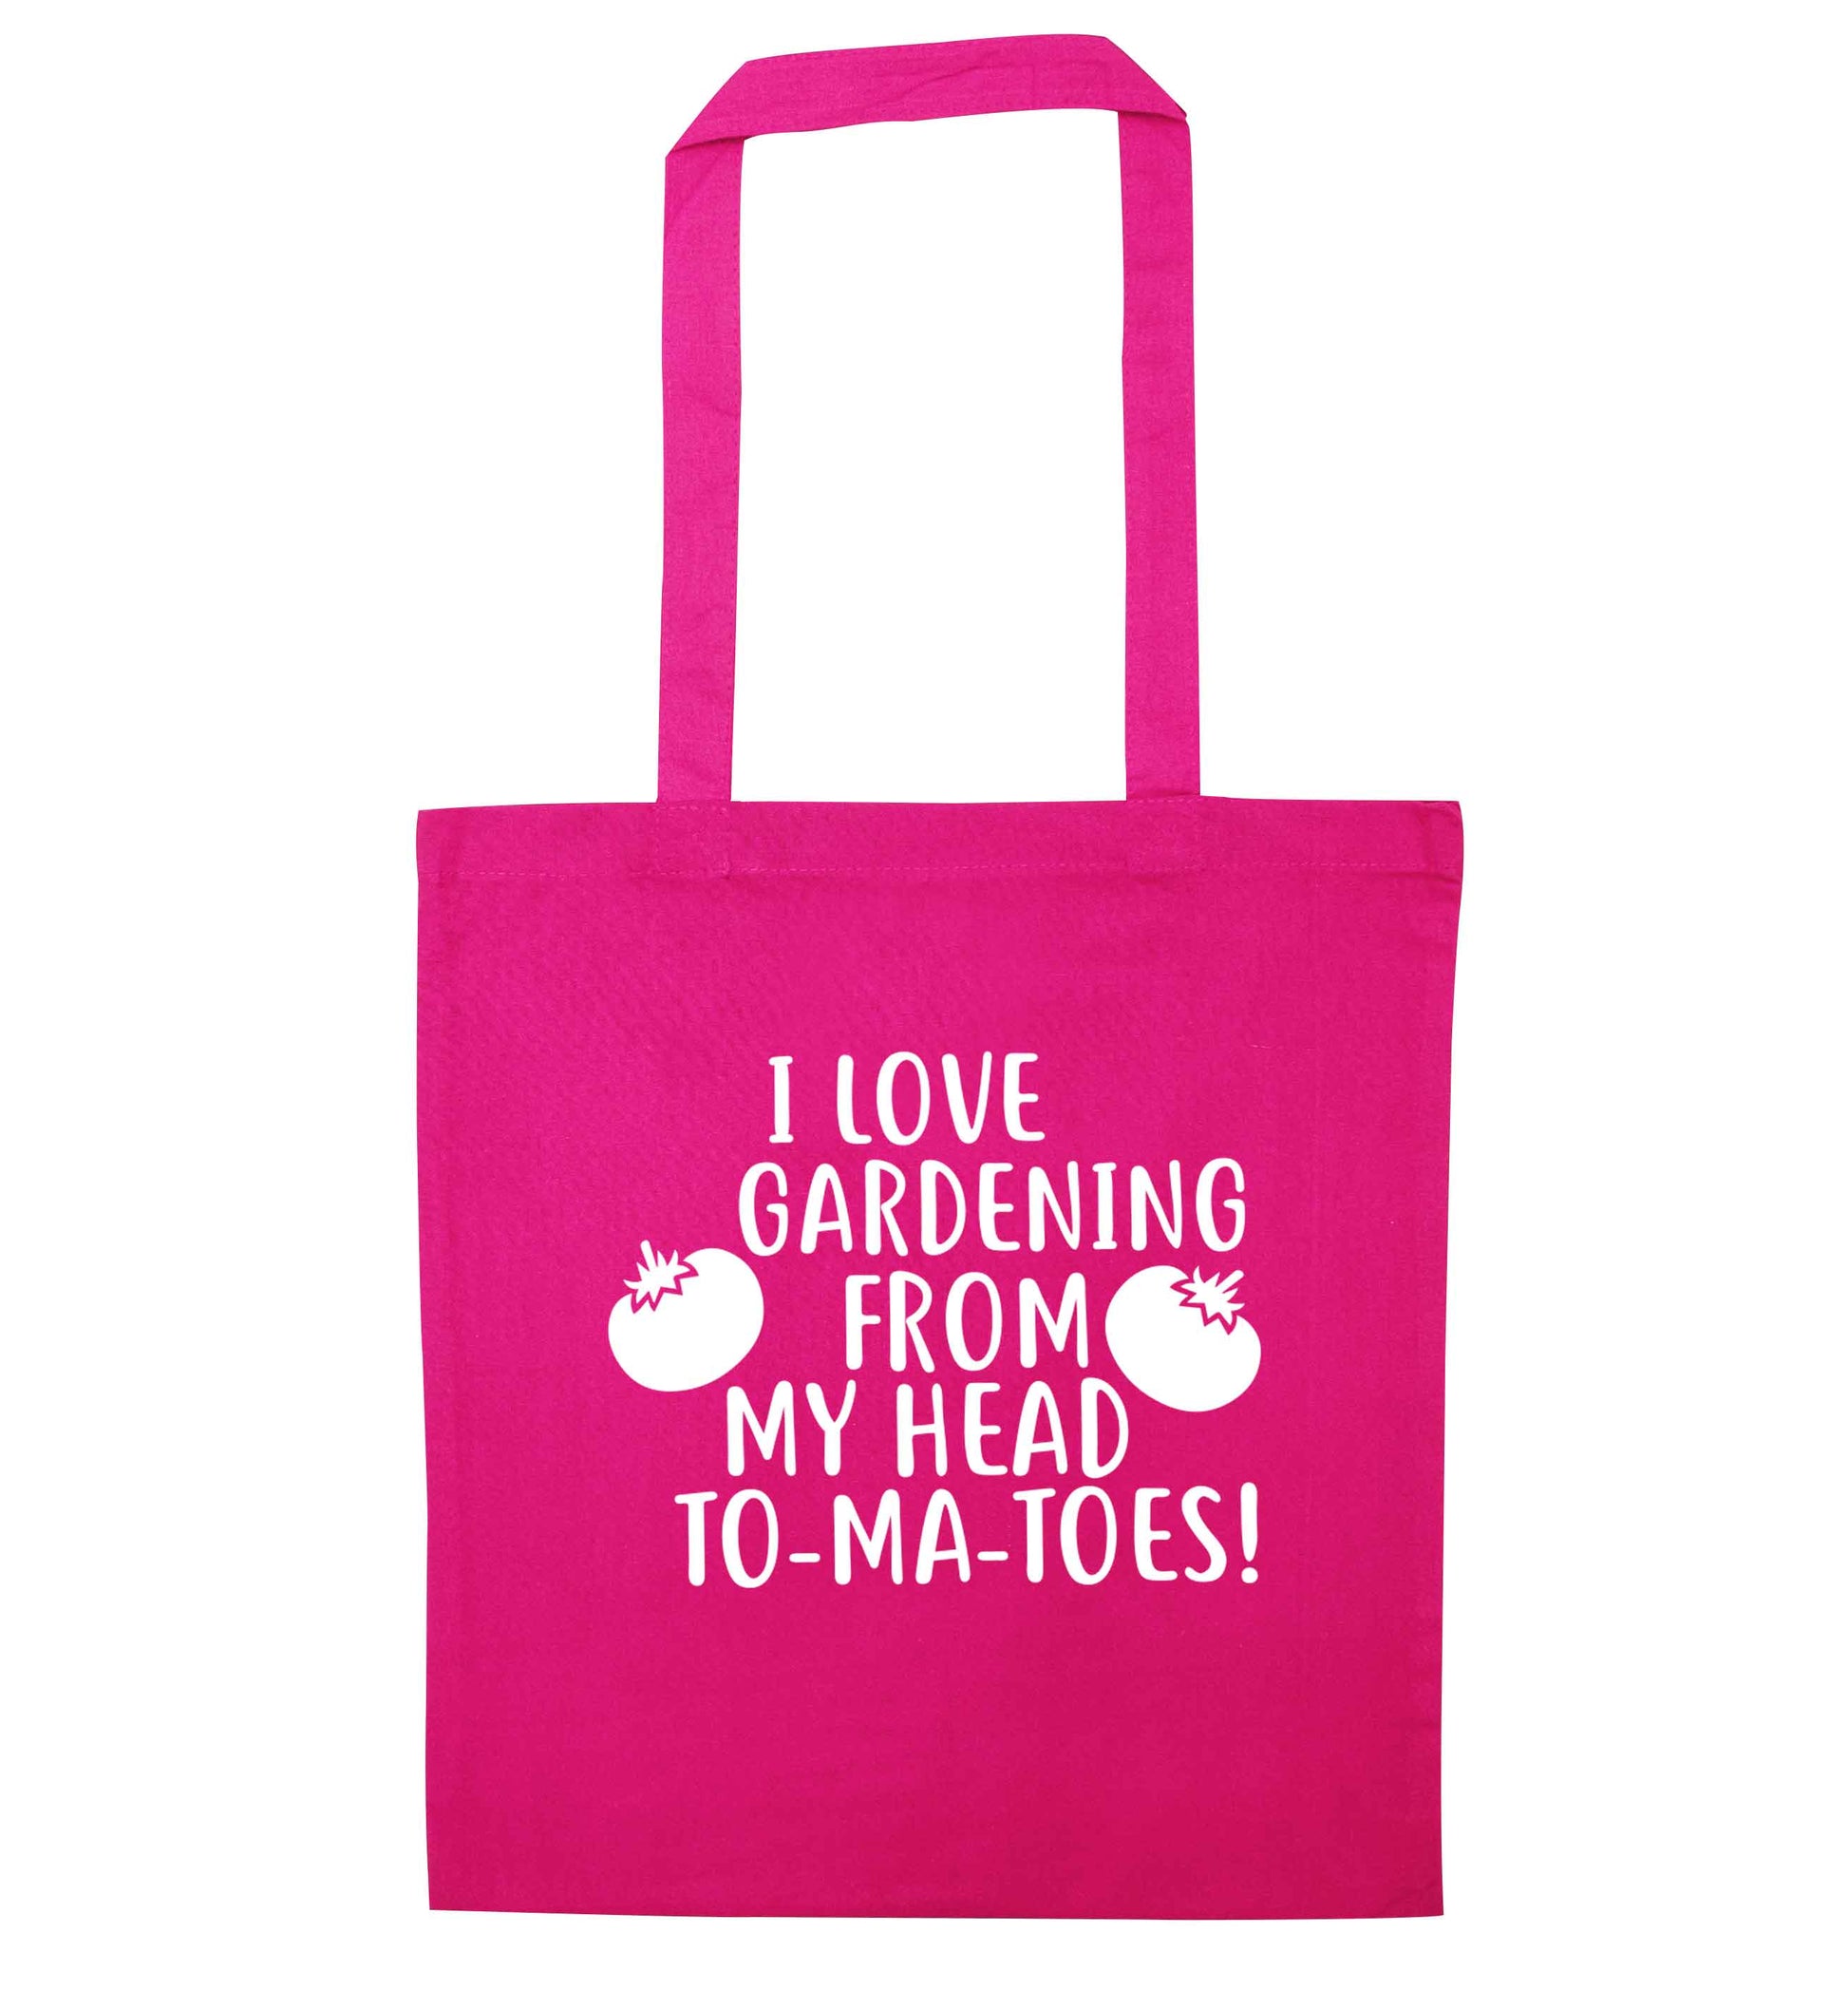 I love gardening from my head to-ma-toes pink tote bag